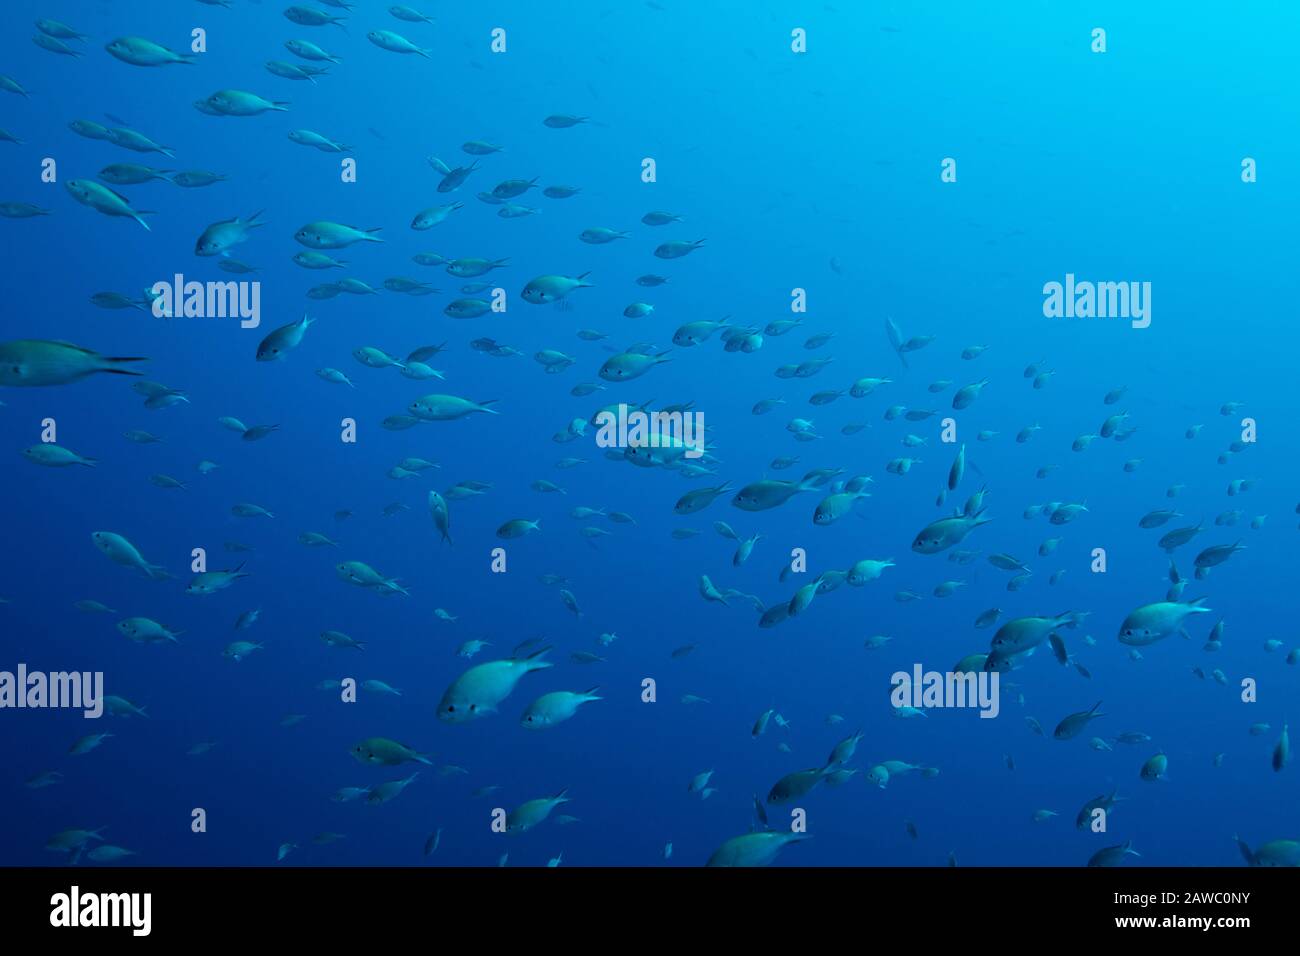 Underwater blue scene with fishes. Photo V.D. Stock Photo